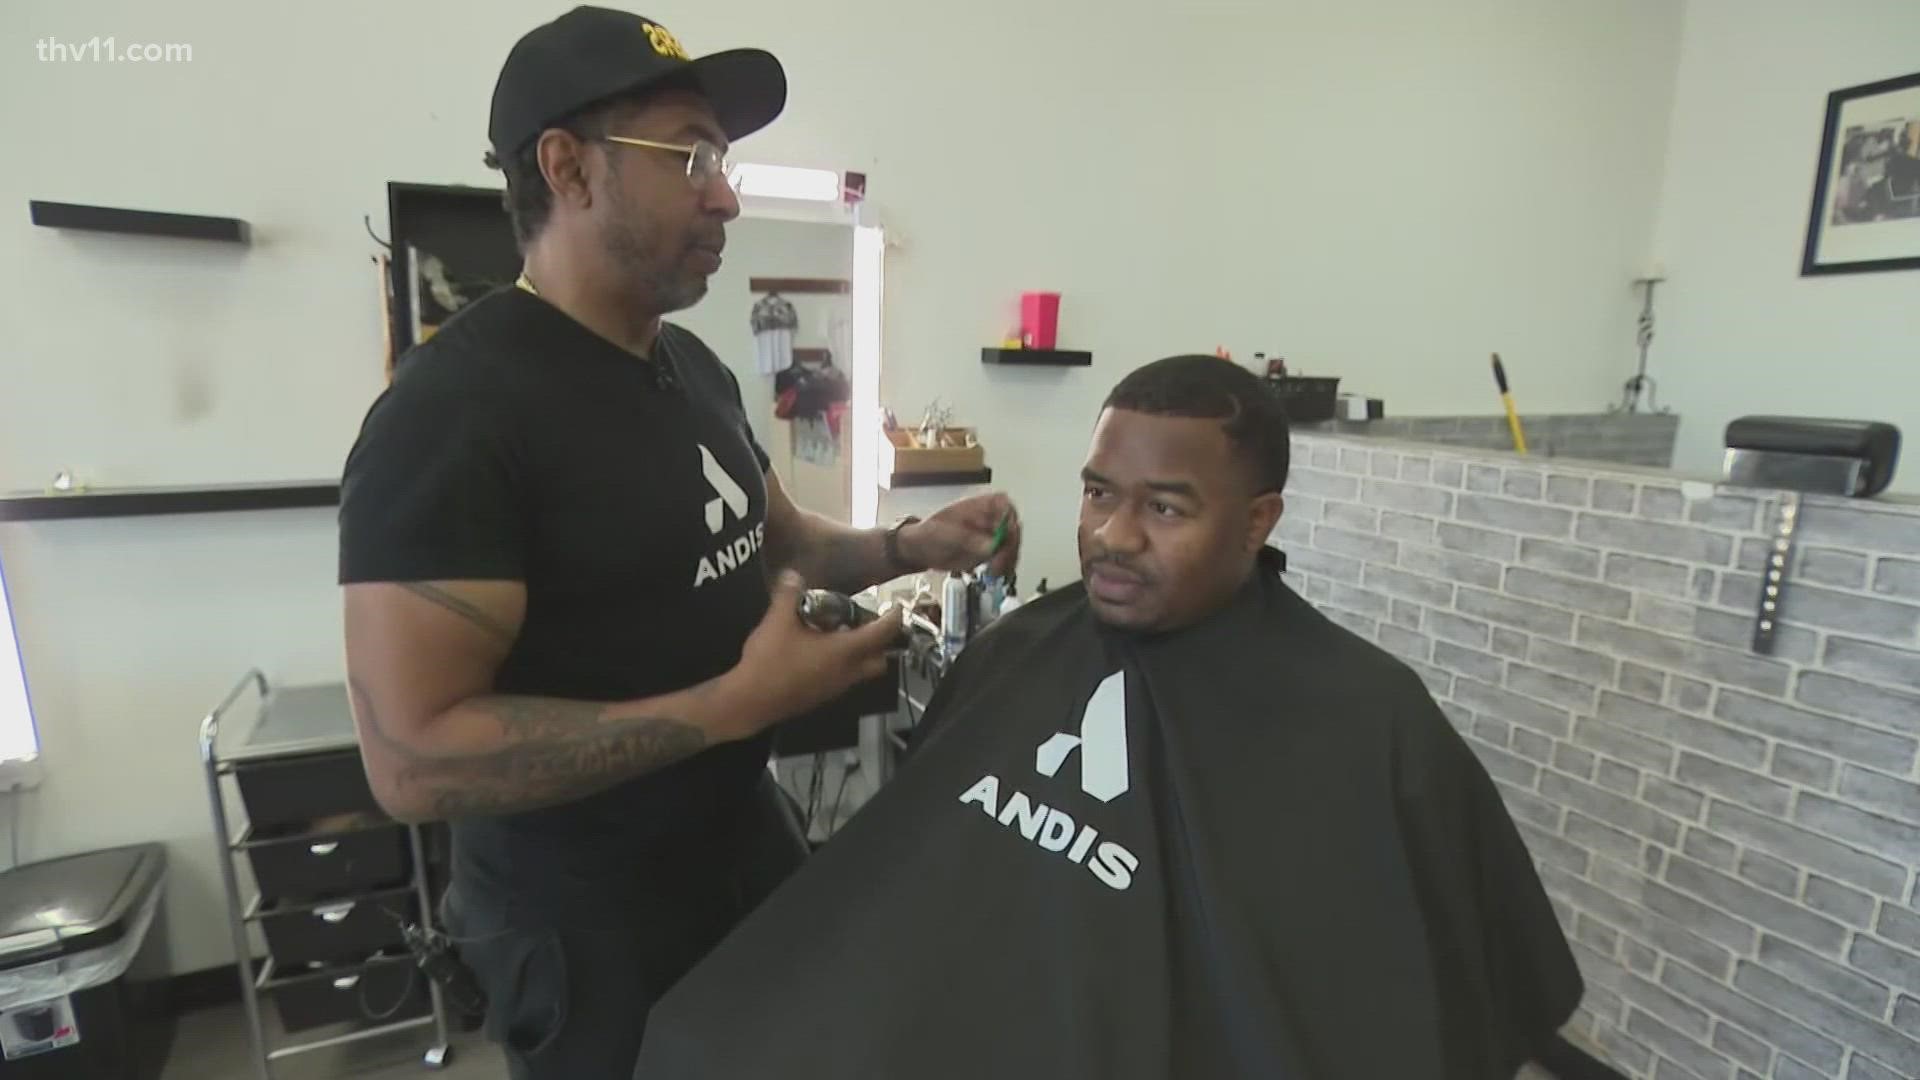 Men's Mental Health: Building Connections at the Barbershop